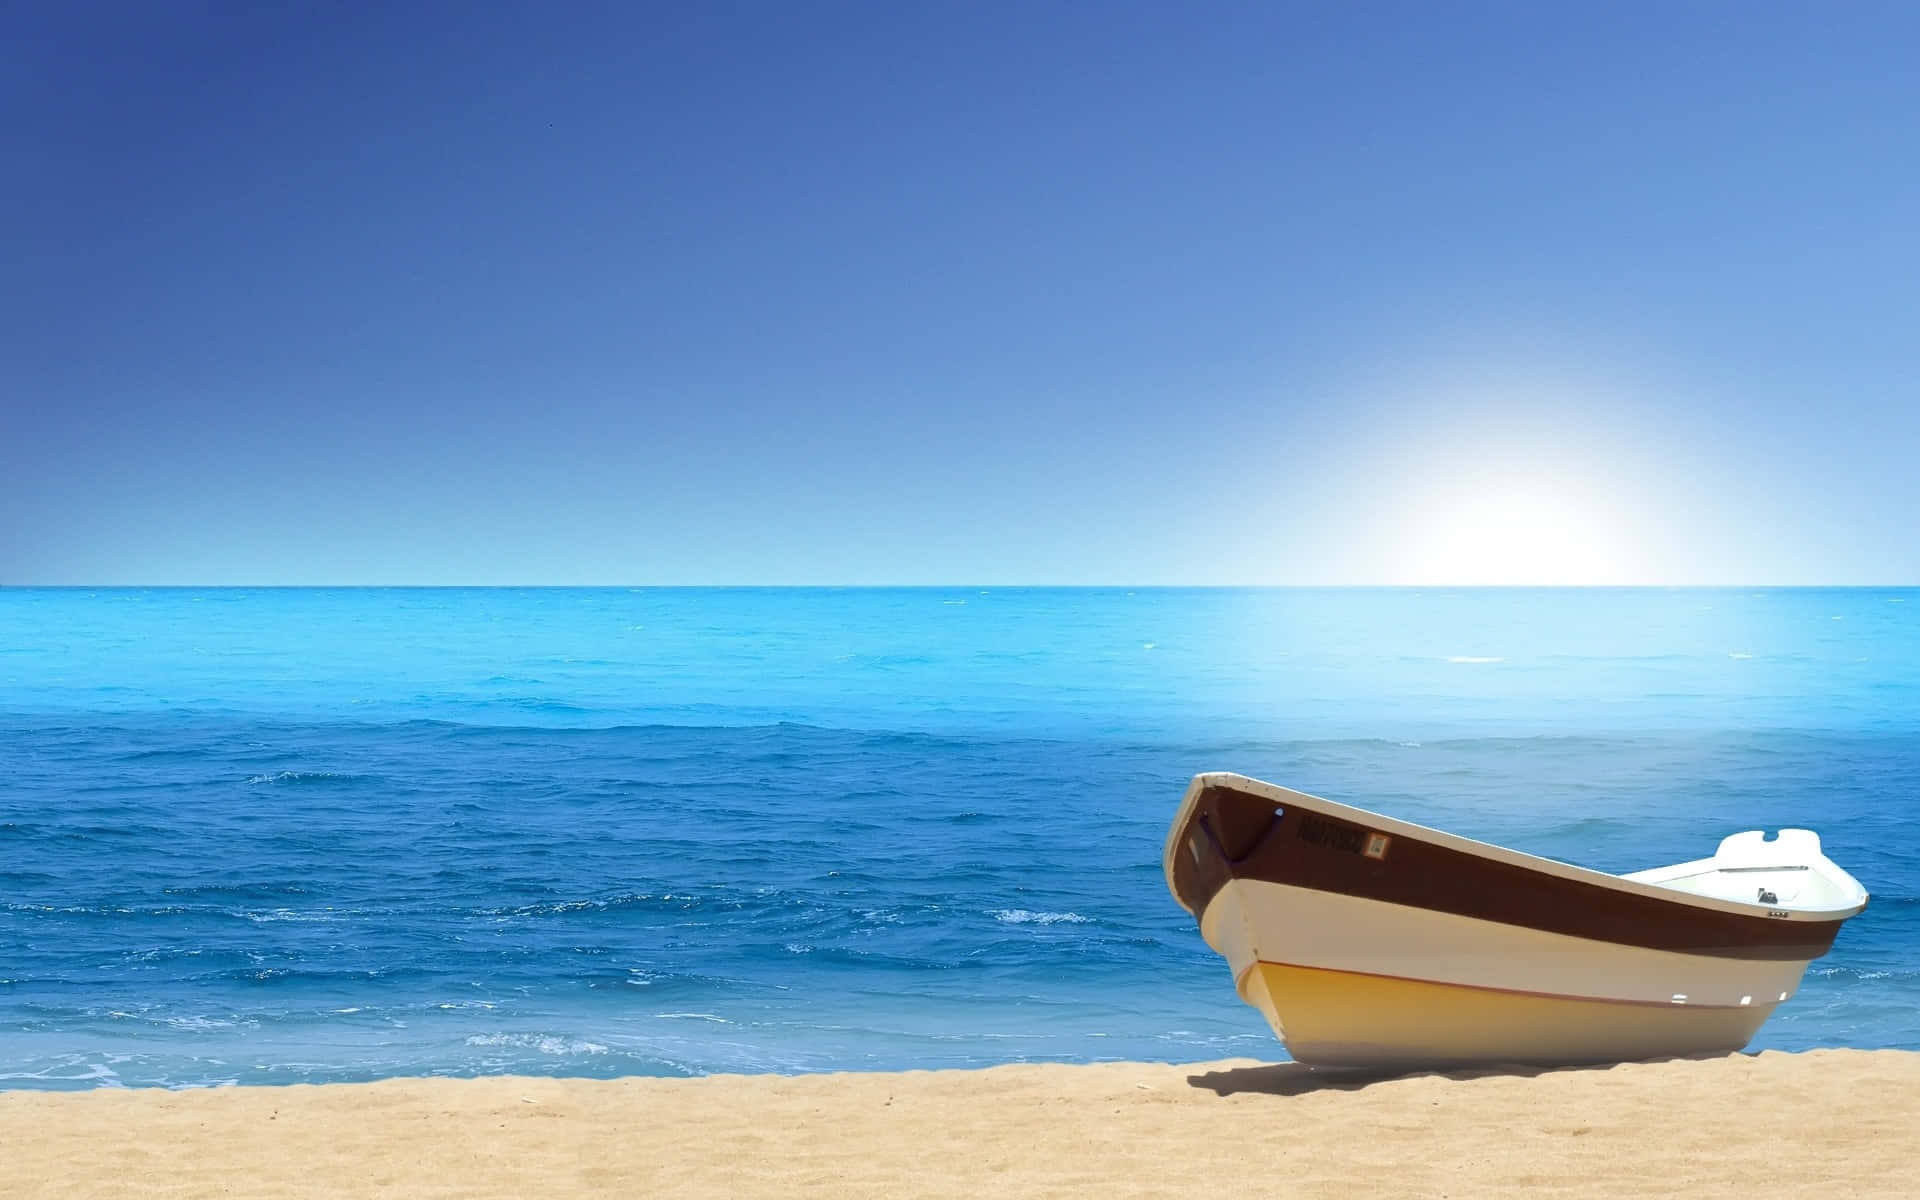 Sunny Beach Shore With A Boat Wallpaper